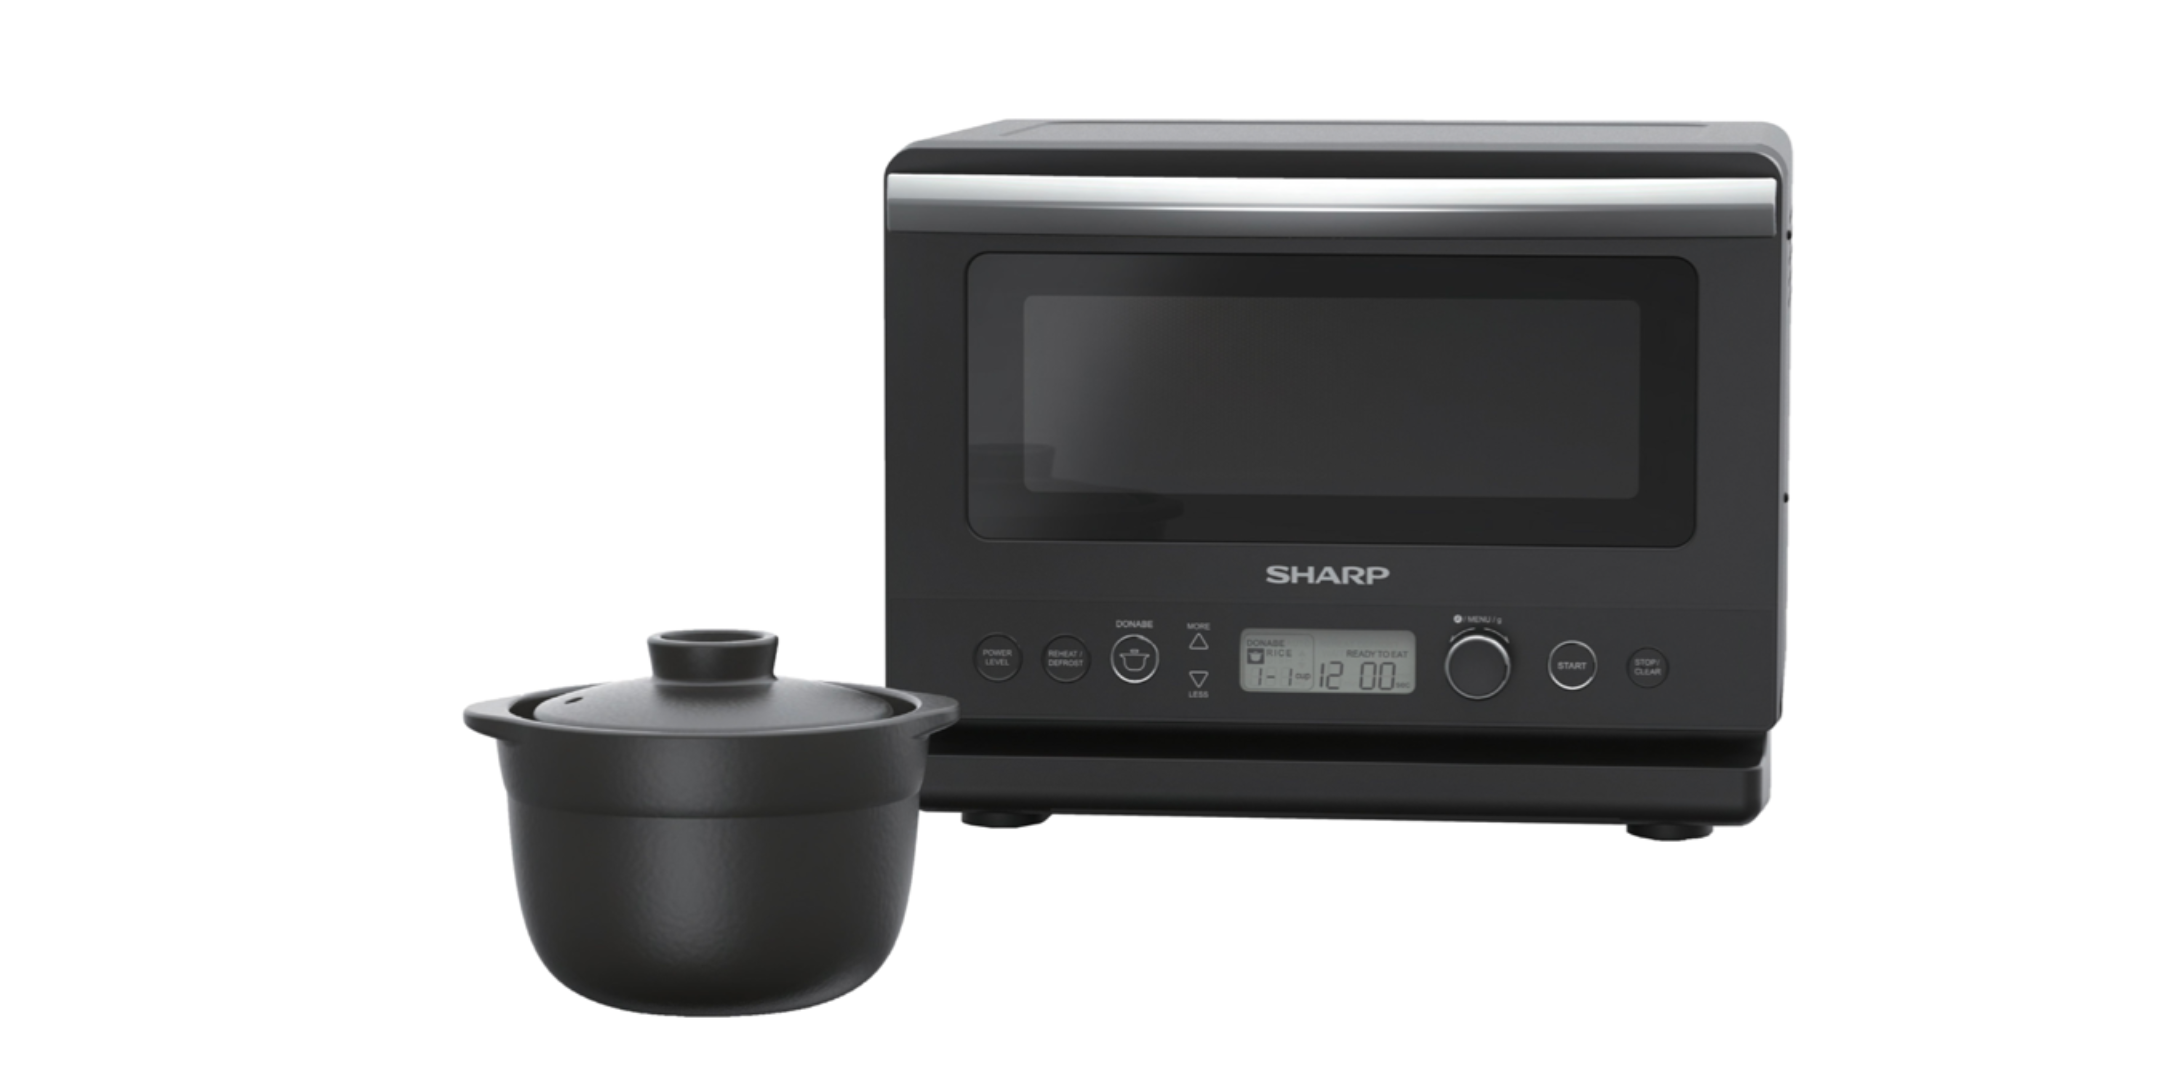 SHARP’s Japan Donabe Rice cooker with claypot’s wholesomeness and microwave’s efficiency